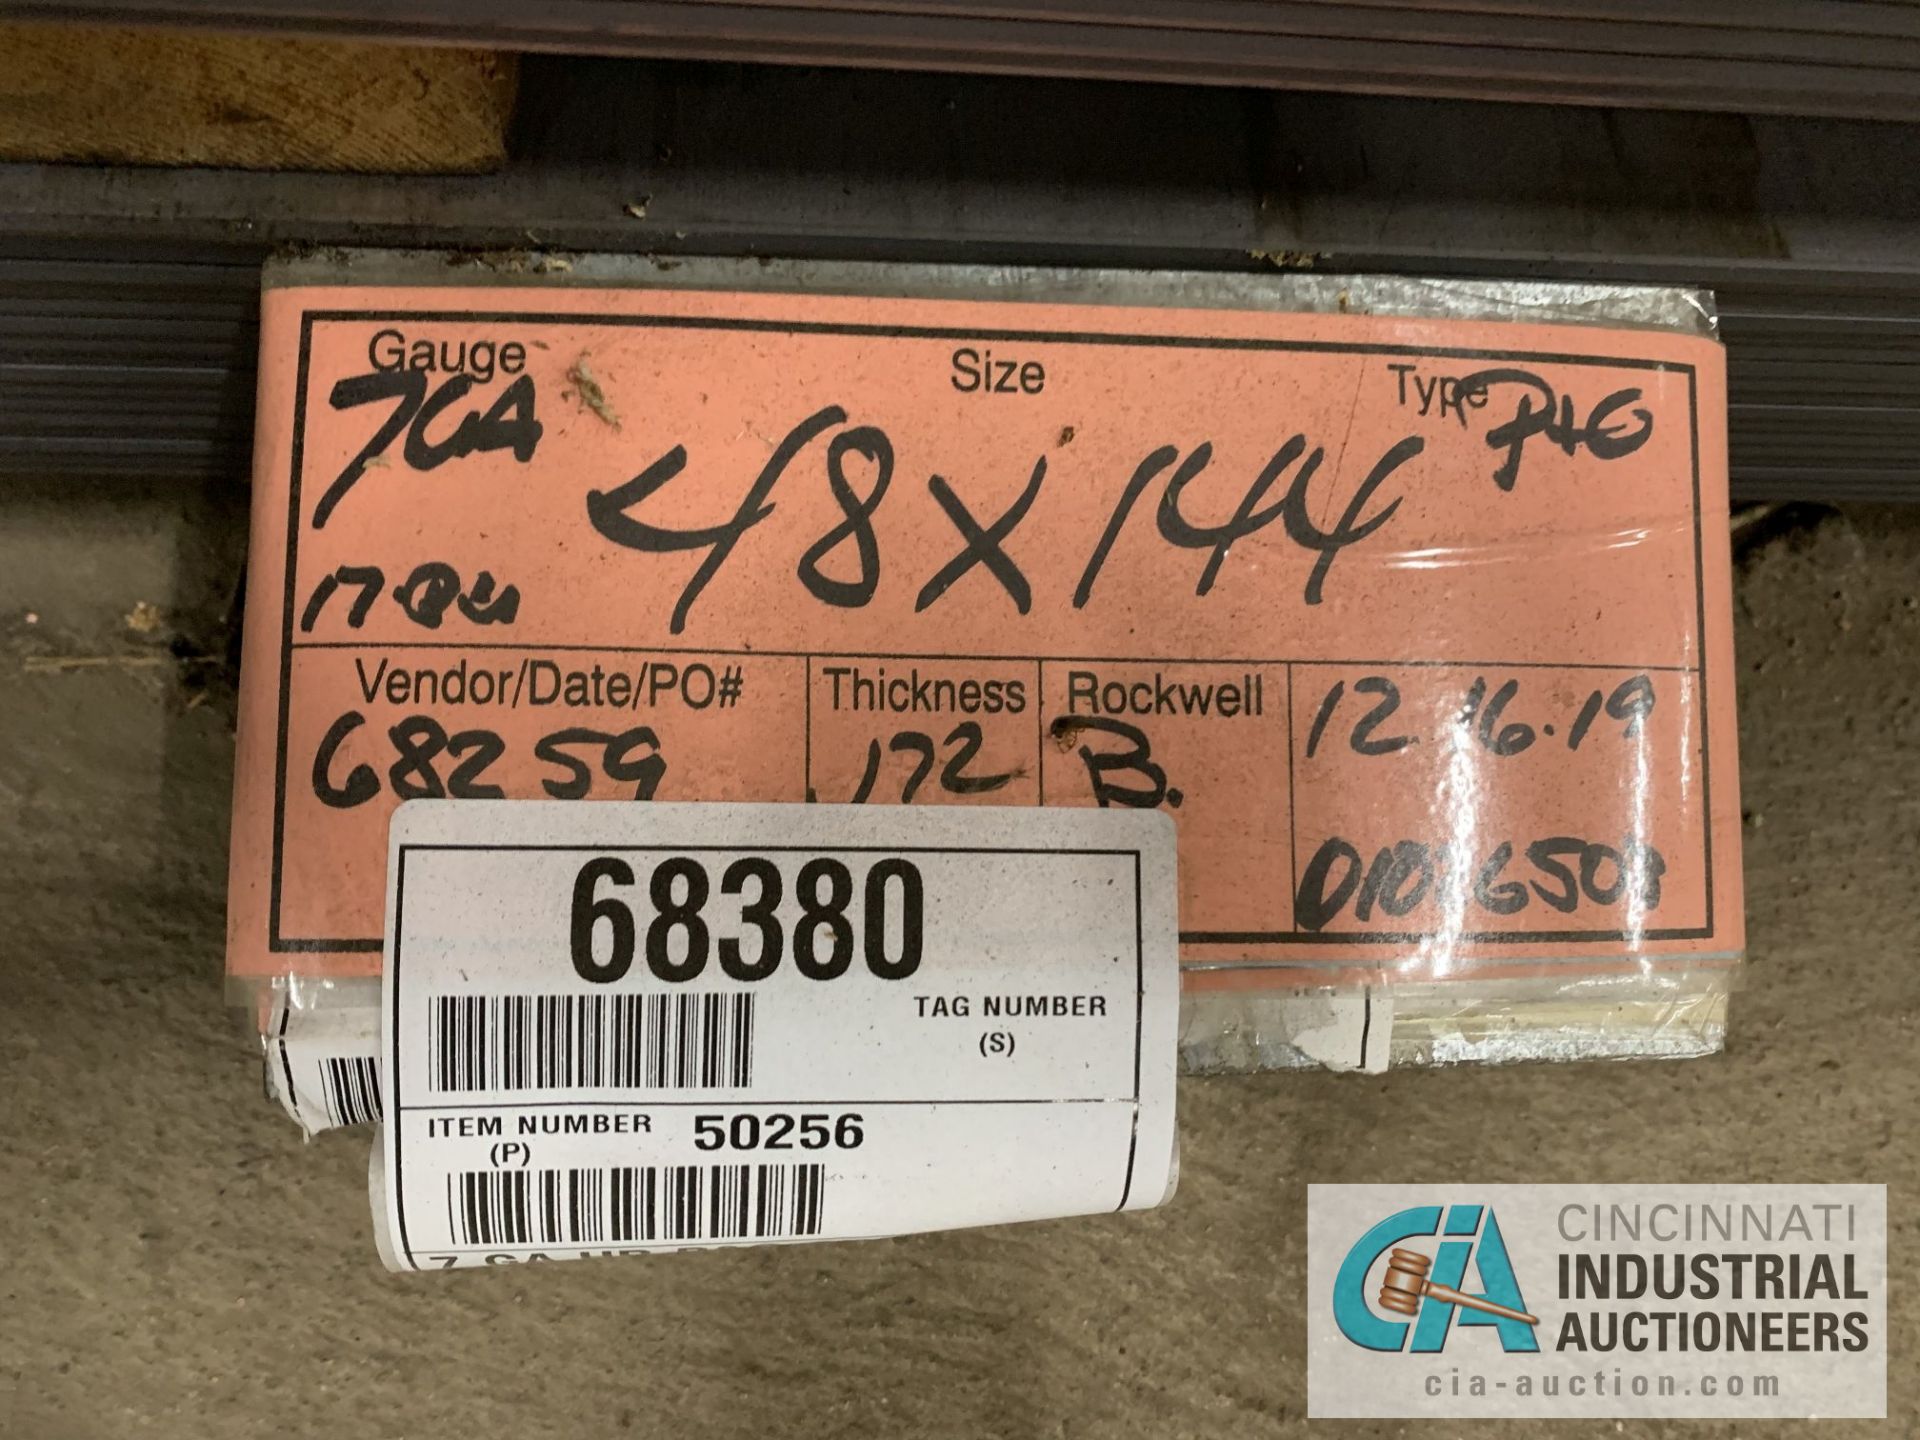 (LOT) APPROX. 21,481 LBS. UNCOATED SHEET STEEL, 1-STACK, 4-BUNDLES, SEE INVENTORY FOR LISTING. - Image 5 of 5